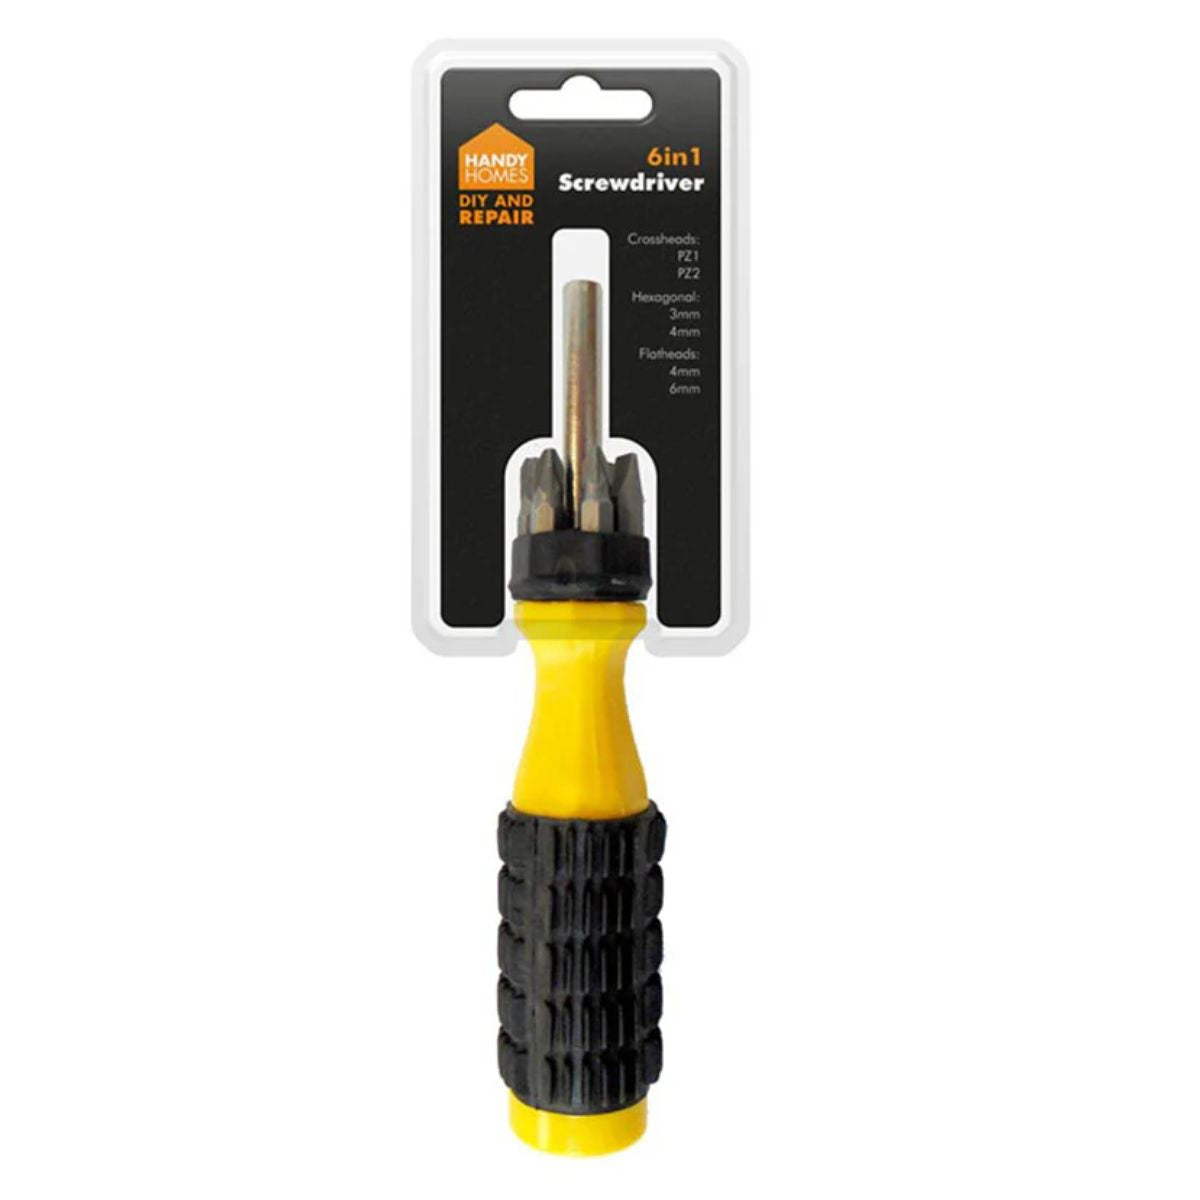 Handy Home - 6 in 1 Screwdriver - 1pcs in packaging with interchangeable bits.